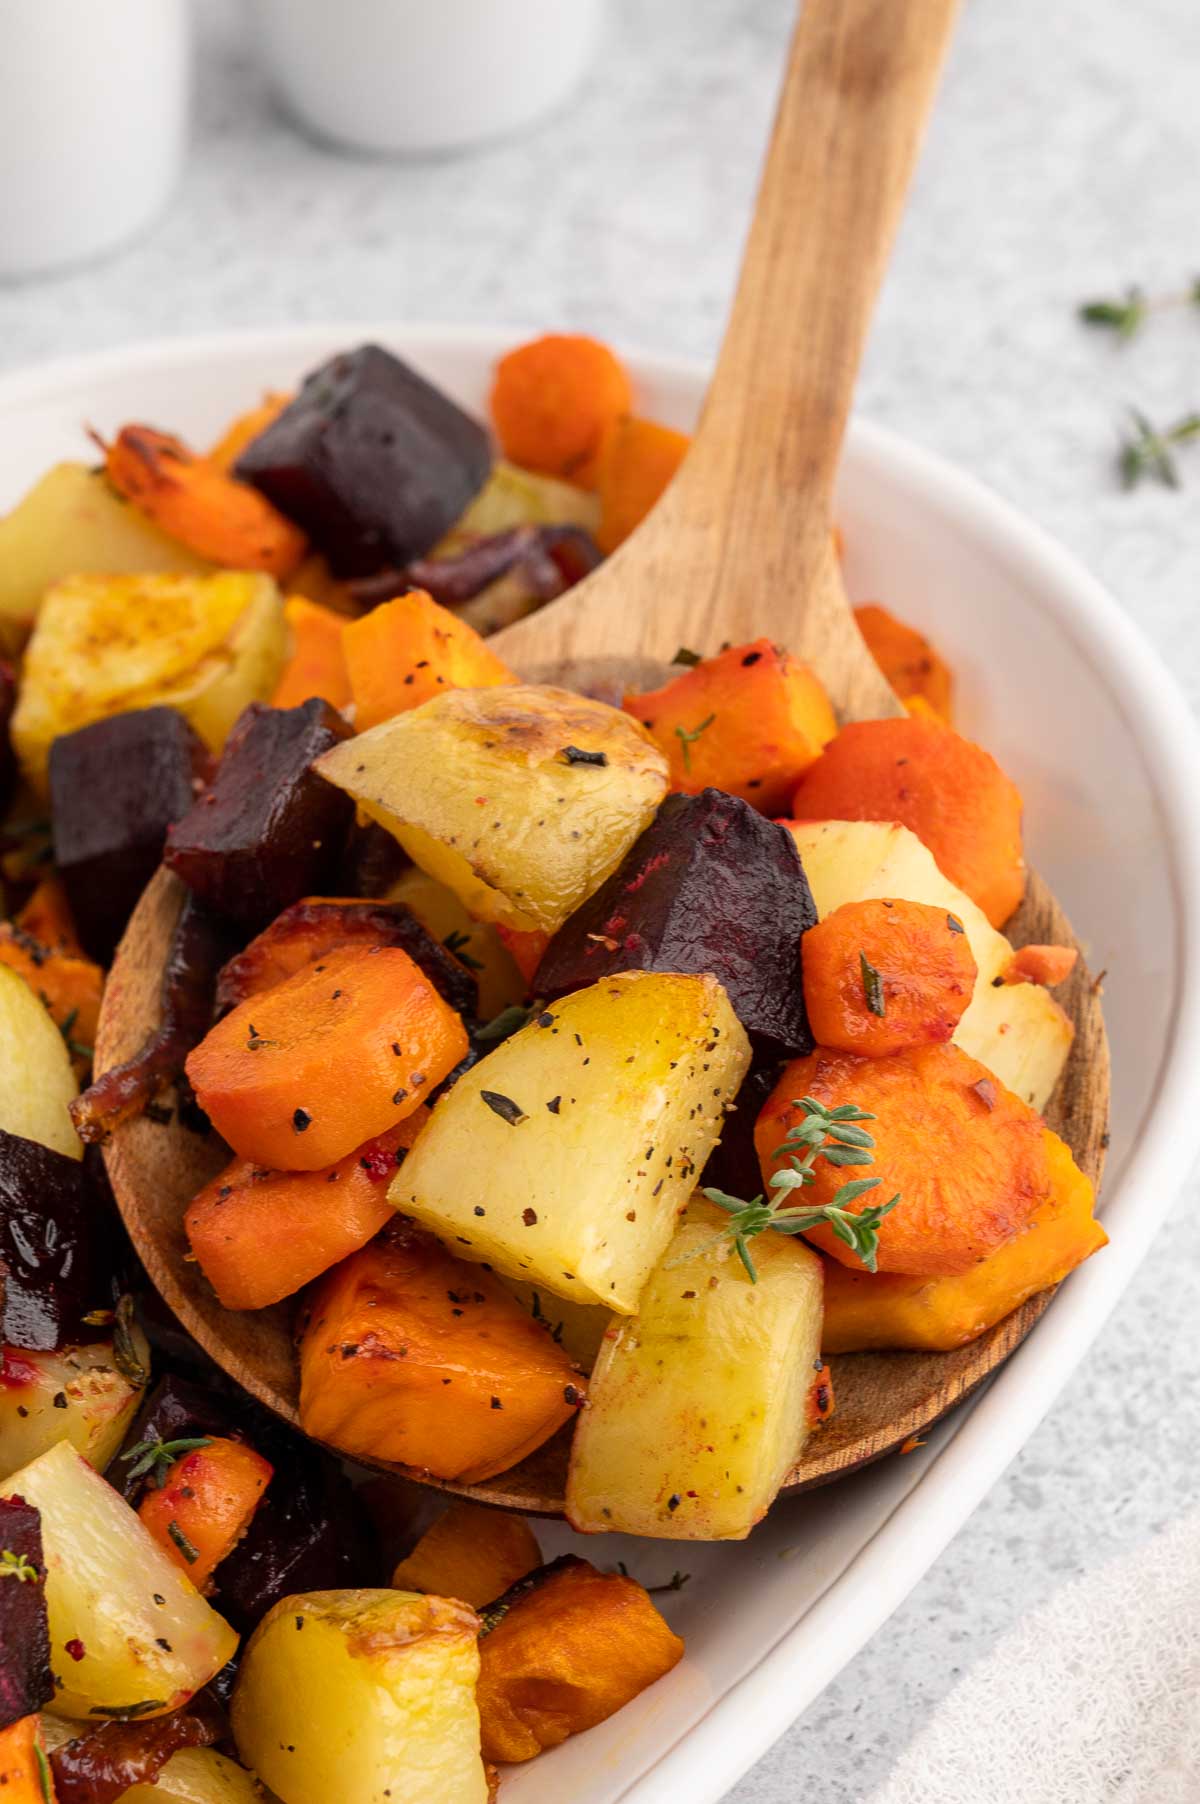 A close-up shot of roasted root vegetables.